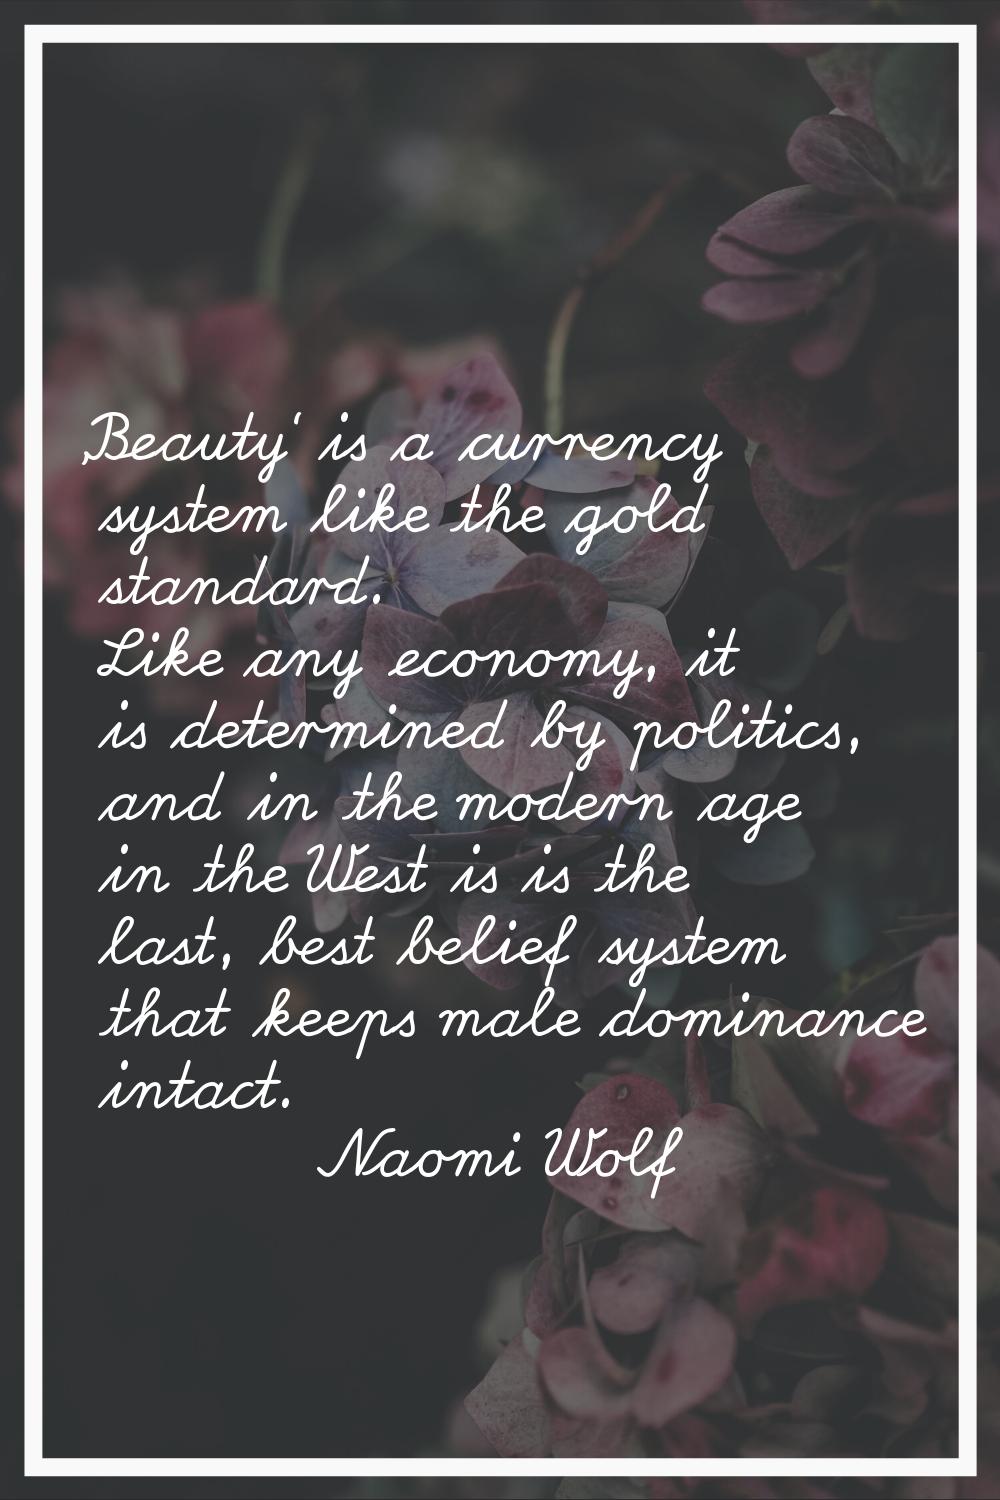 'Beauty' is a currency system like the gold standard. Like any economy, it is determined by politic